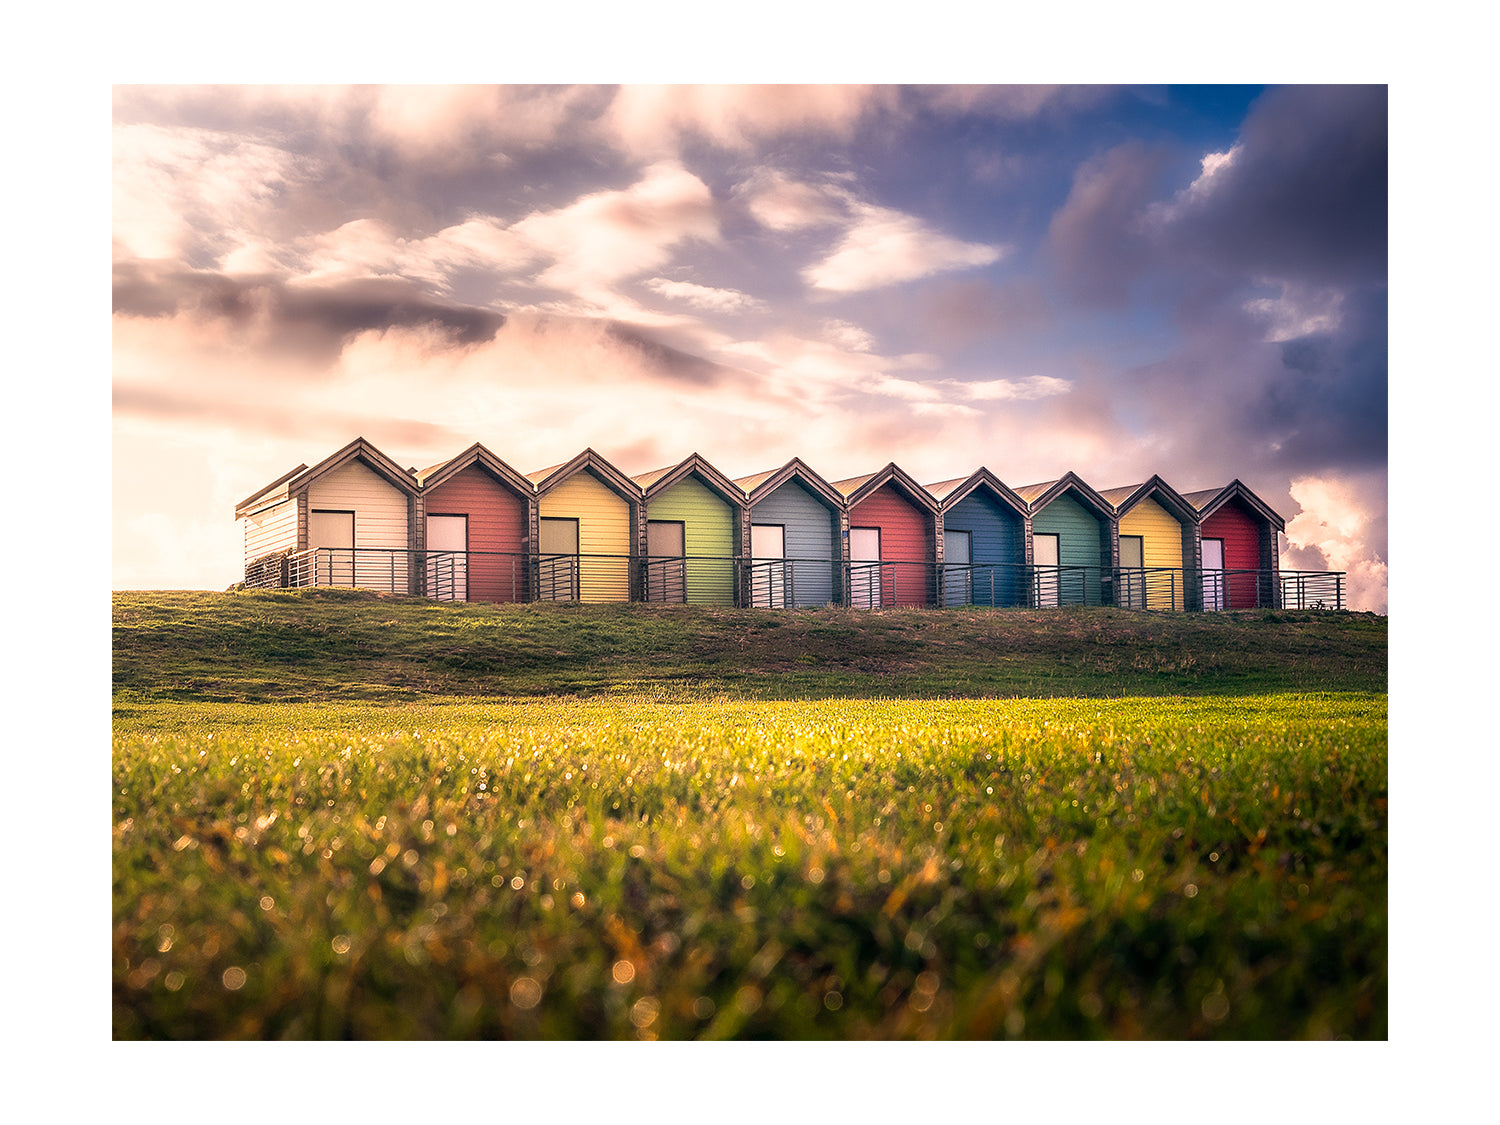 Blyth Huts From The Ground - England